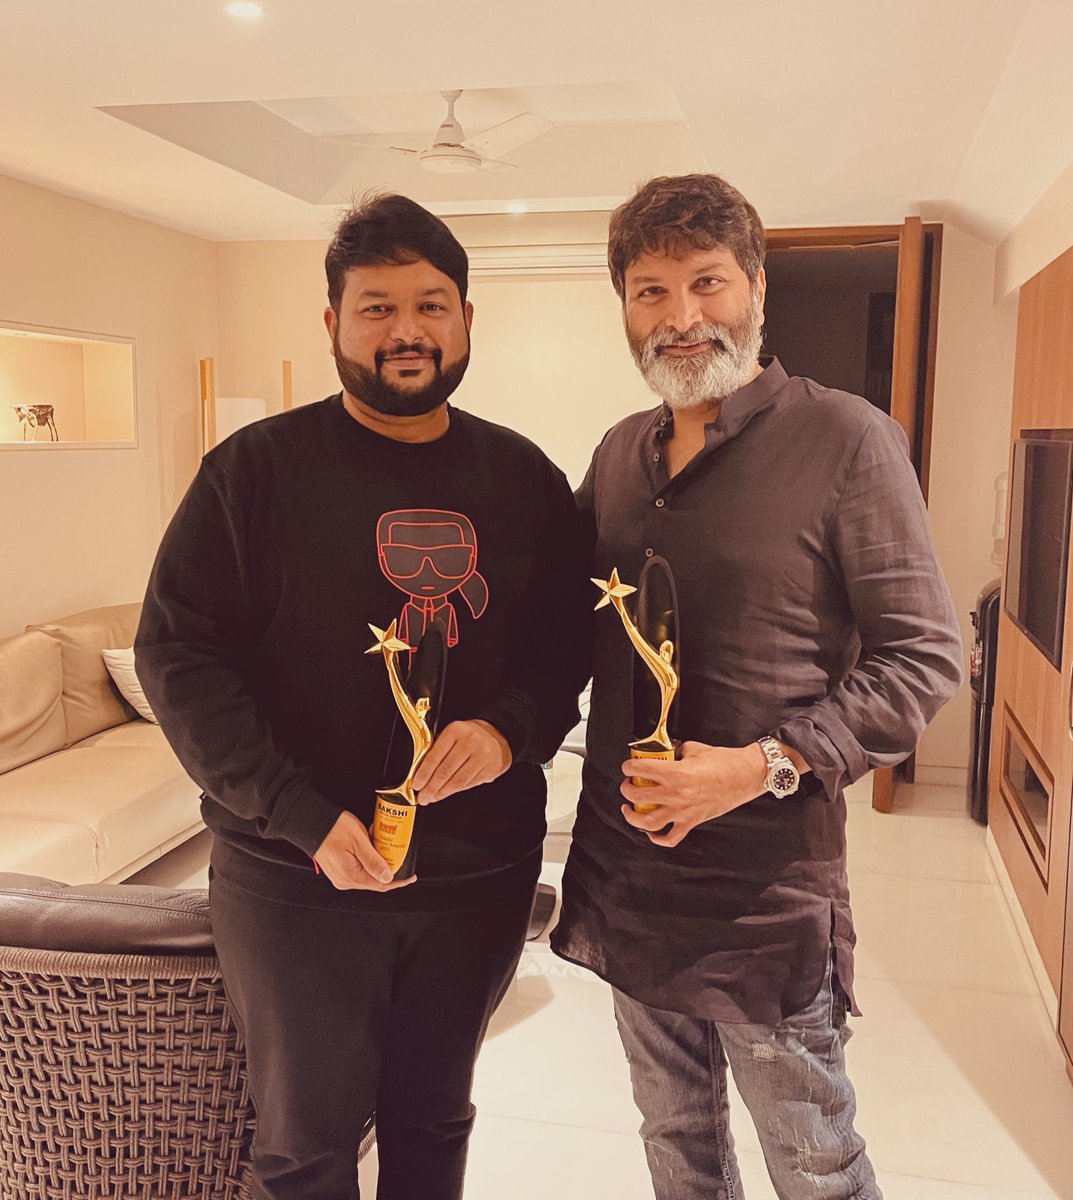 My all Time HIGHH ♥️ My dear #director Shri #Trivikram gaaru 🎬🎵My respect & love to Sir Who made it possible for all of  Us ⭐️ #AlaVaikunthapurramuloo 🎵
#BestDirector ✊🎬
&
Me Getting this #BestMusicDirector Award for #AlaVaikunthapurramulooMusic #Avplmusic #AvplAlbum ⭐️🎵🏆